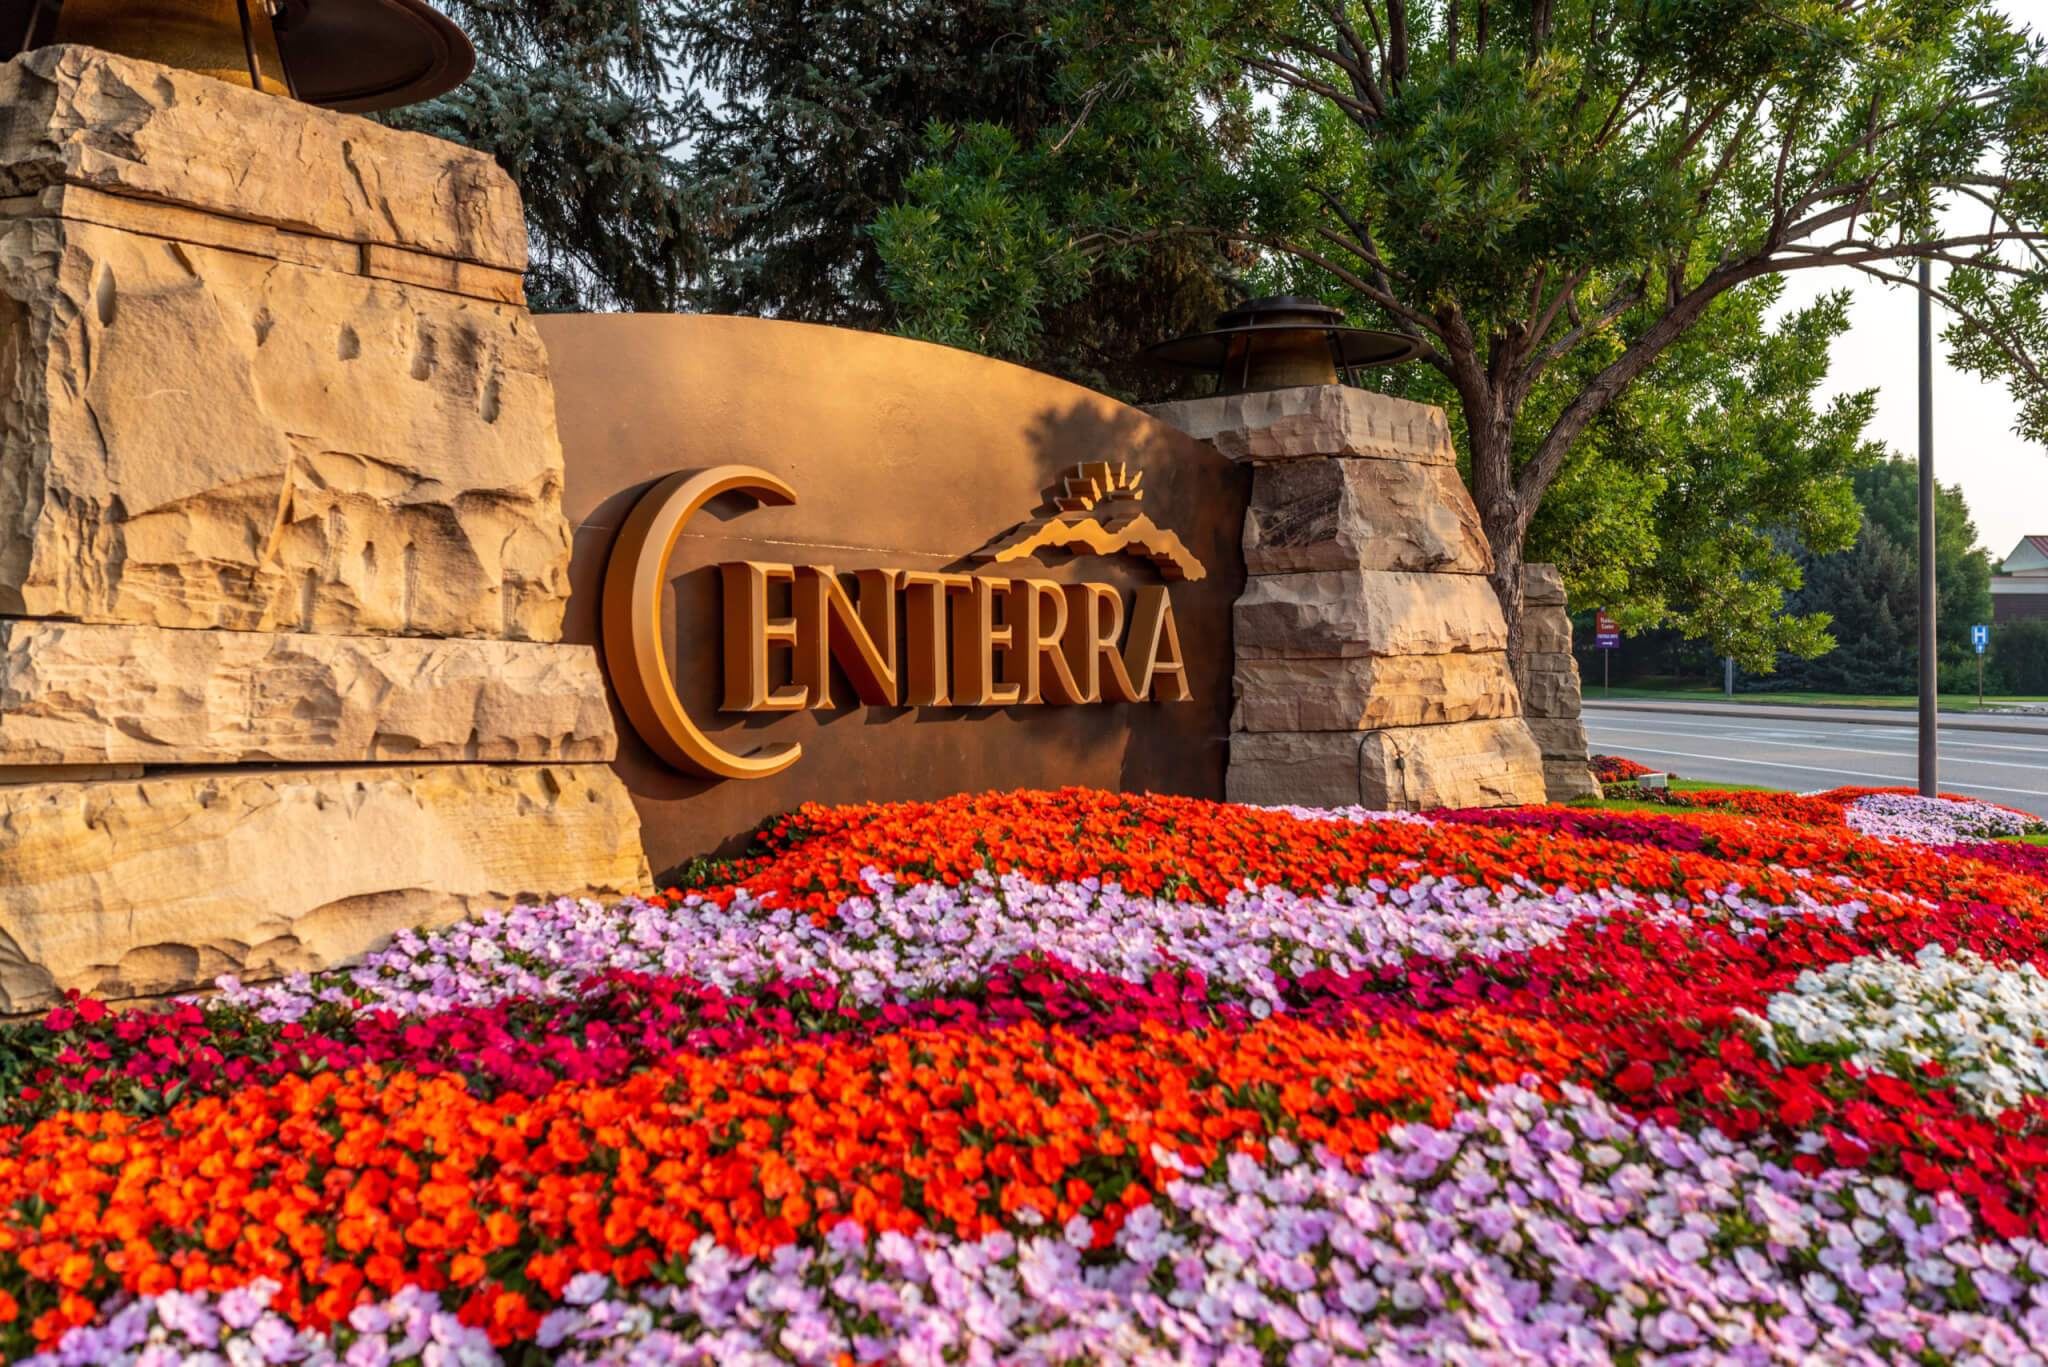 Red, purple colour flower bed in front of centerra entrance